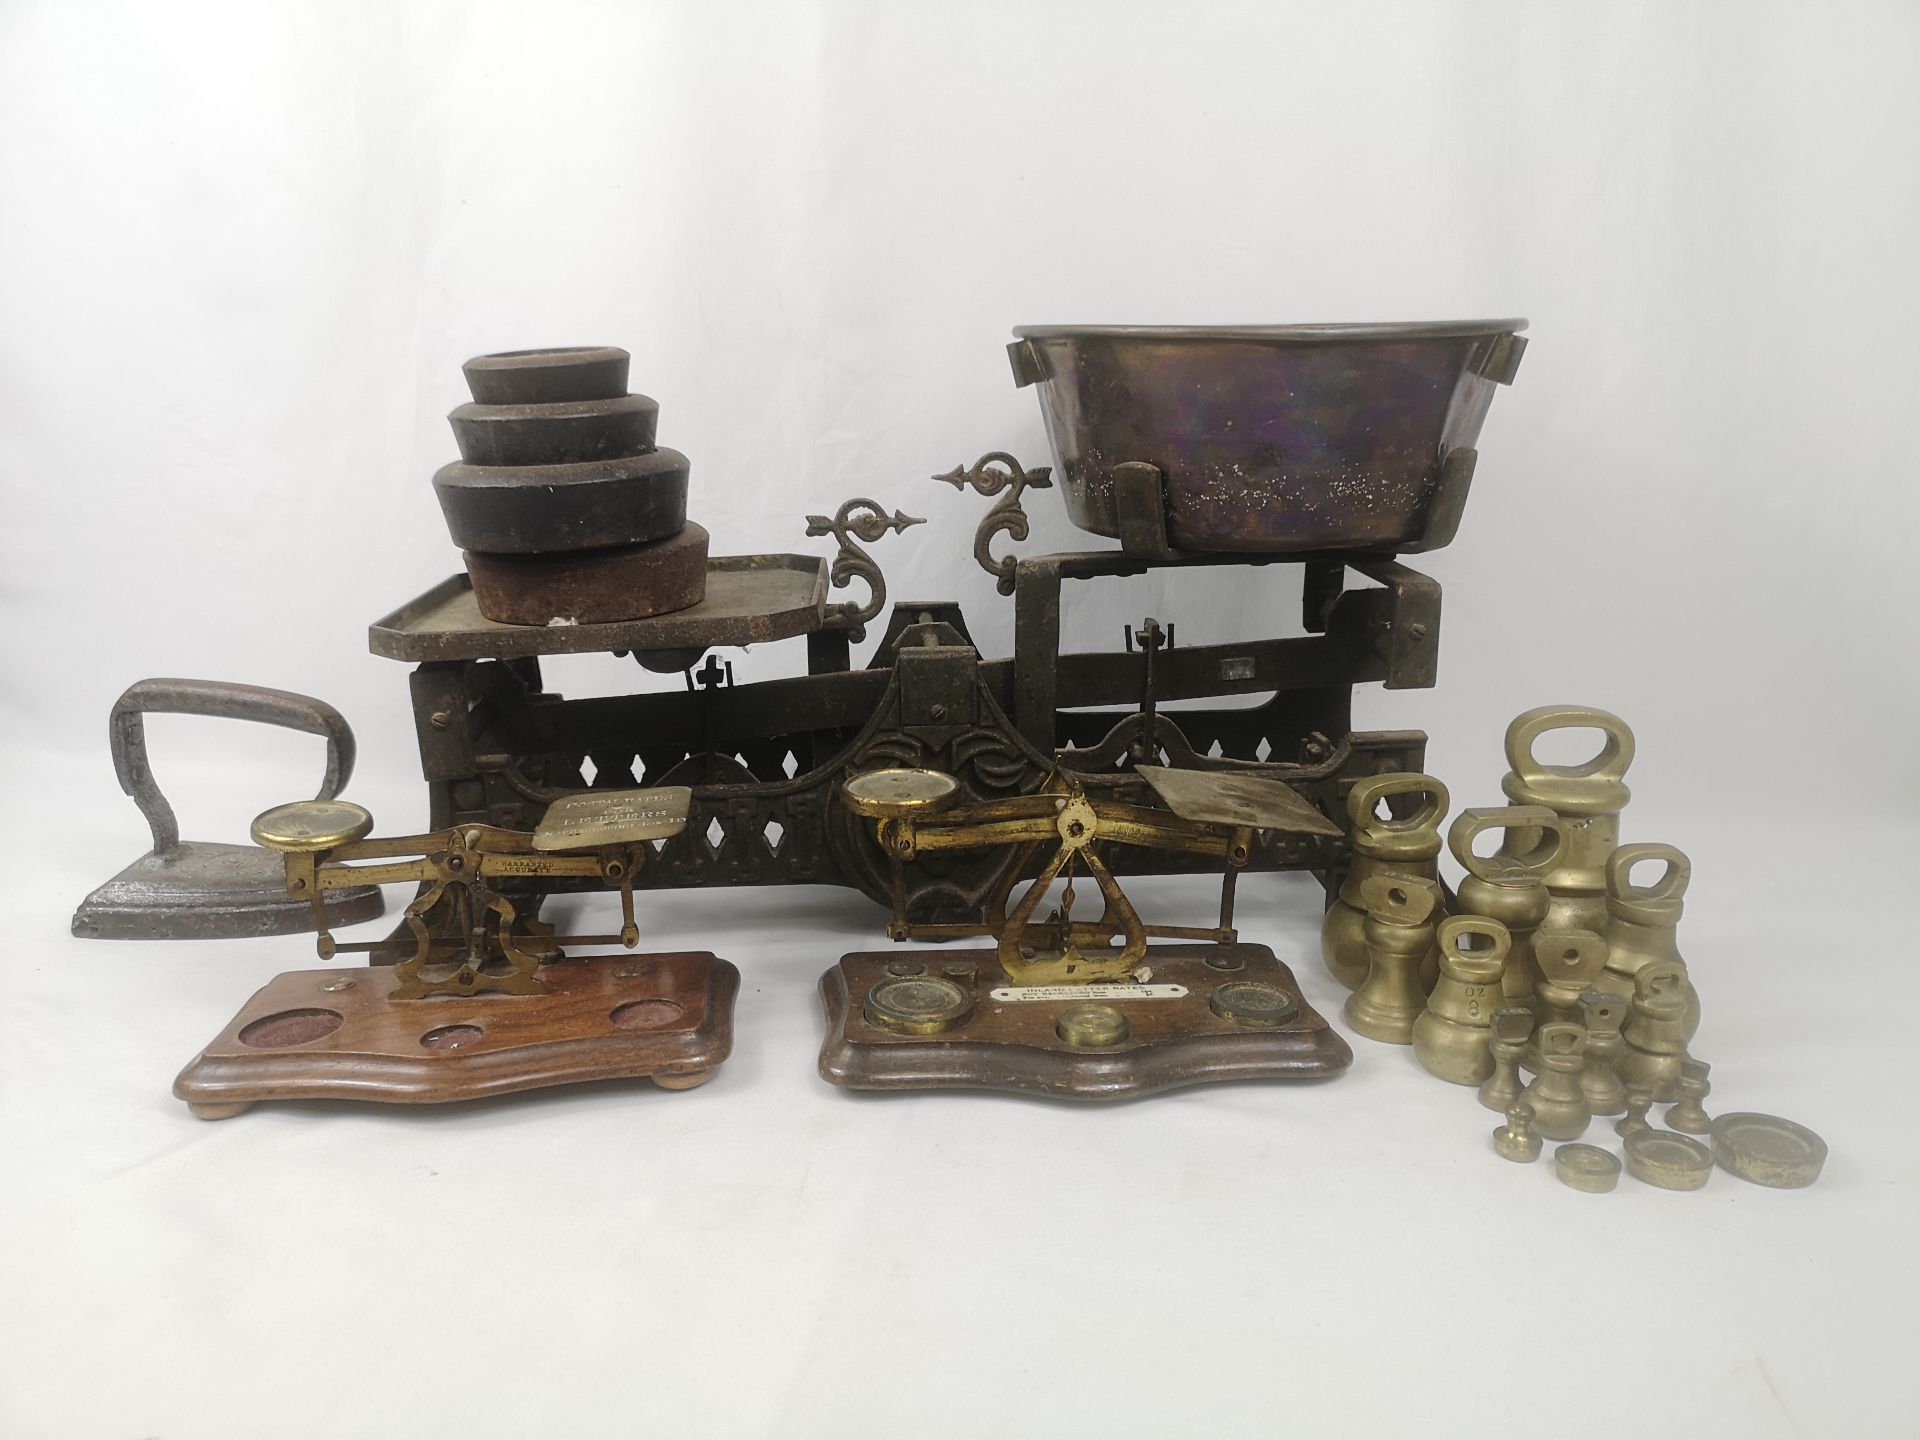 Set of cast iron scales with weights - Image 3 of 10